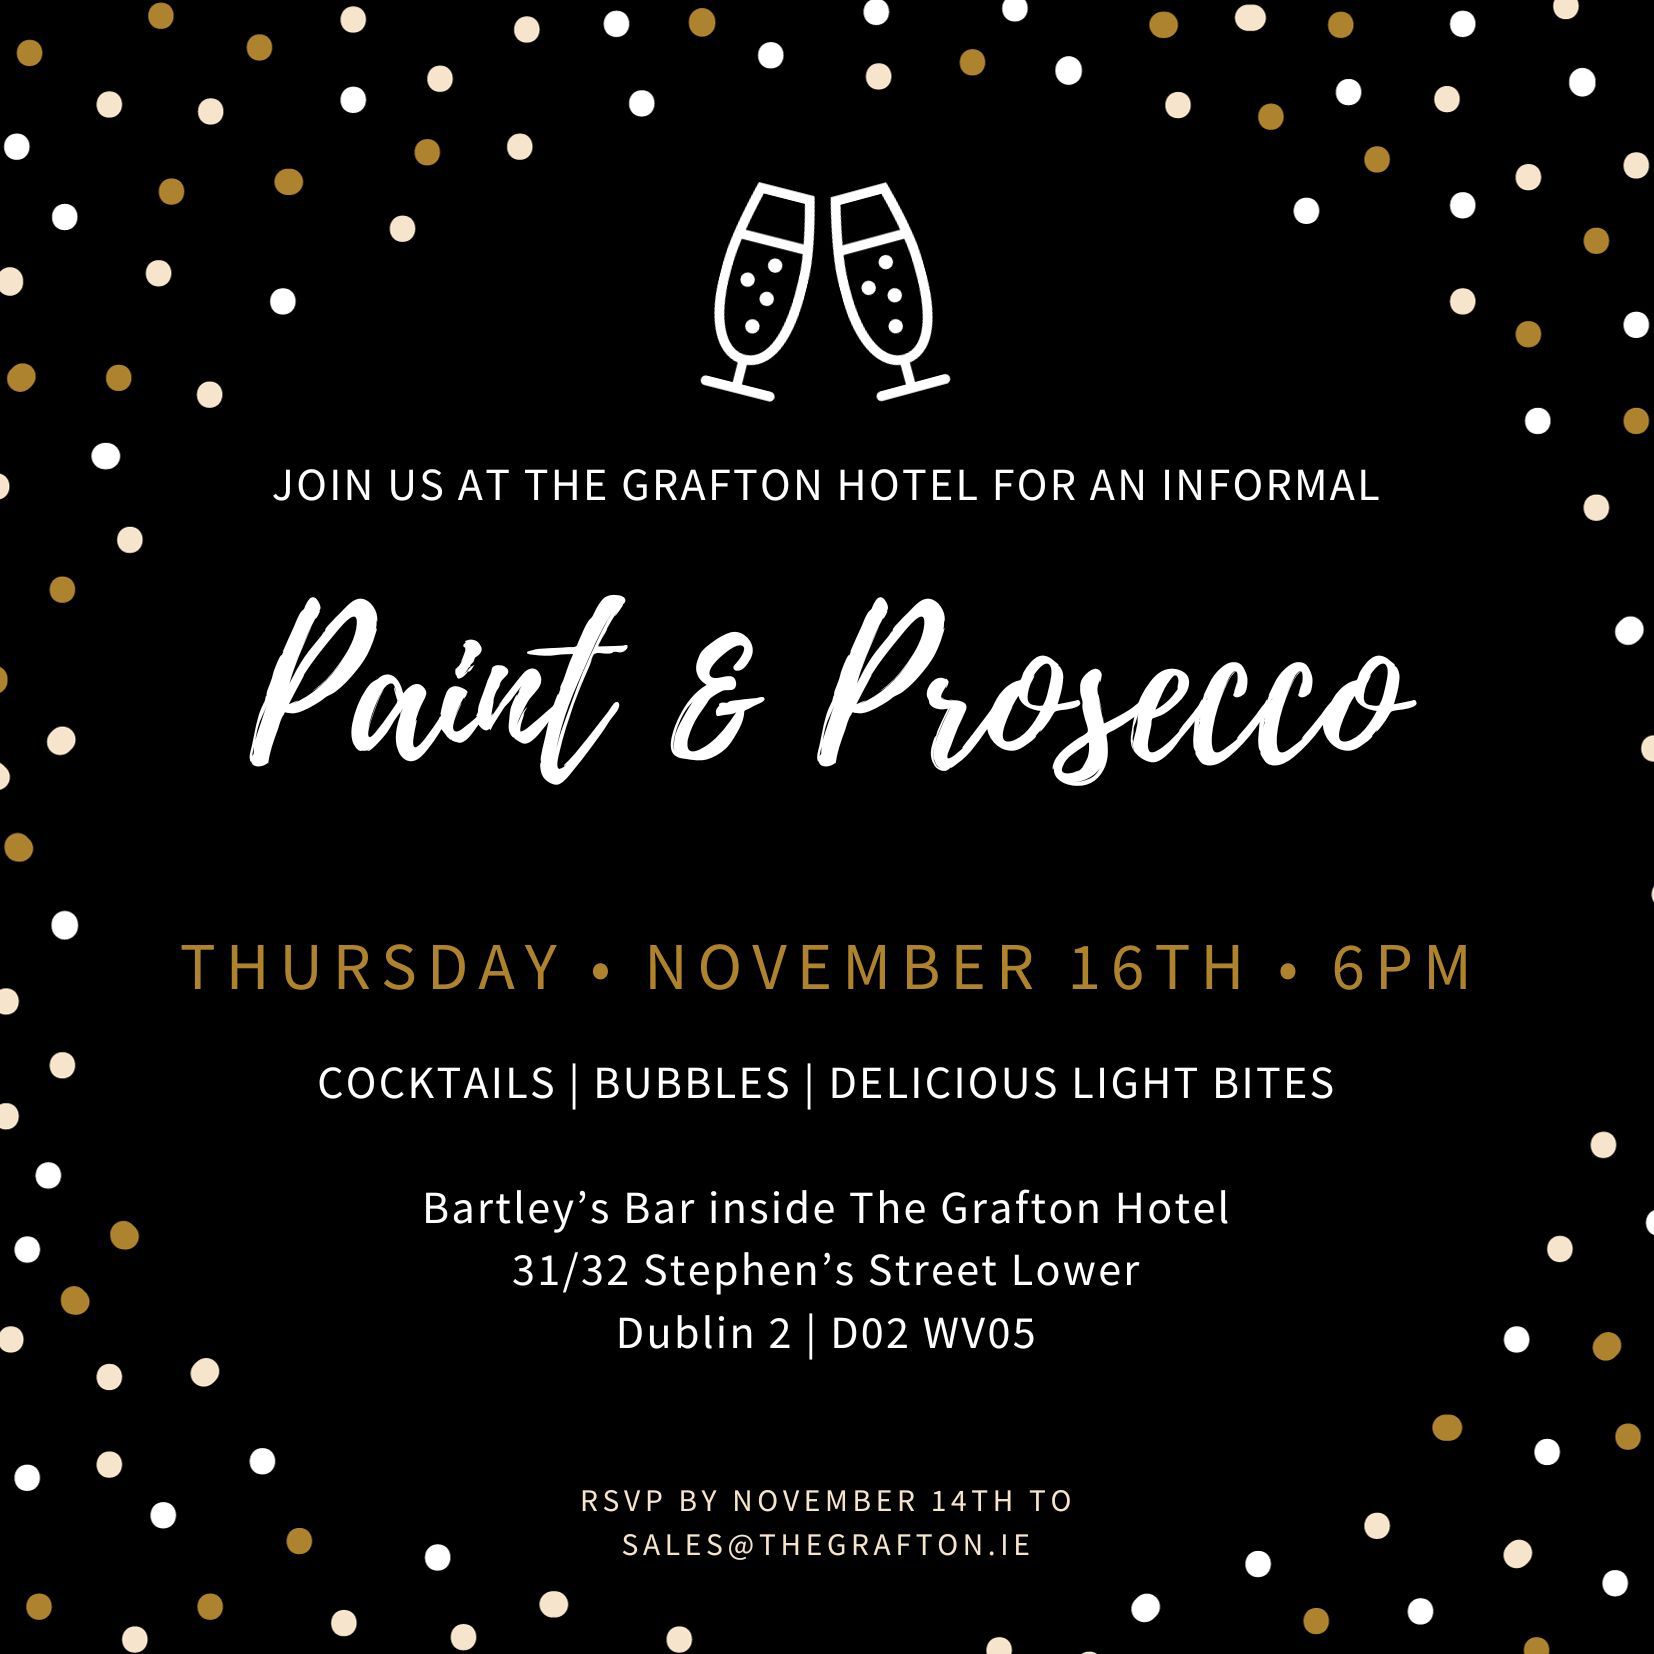 Paint and Prosecco